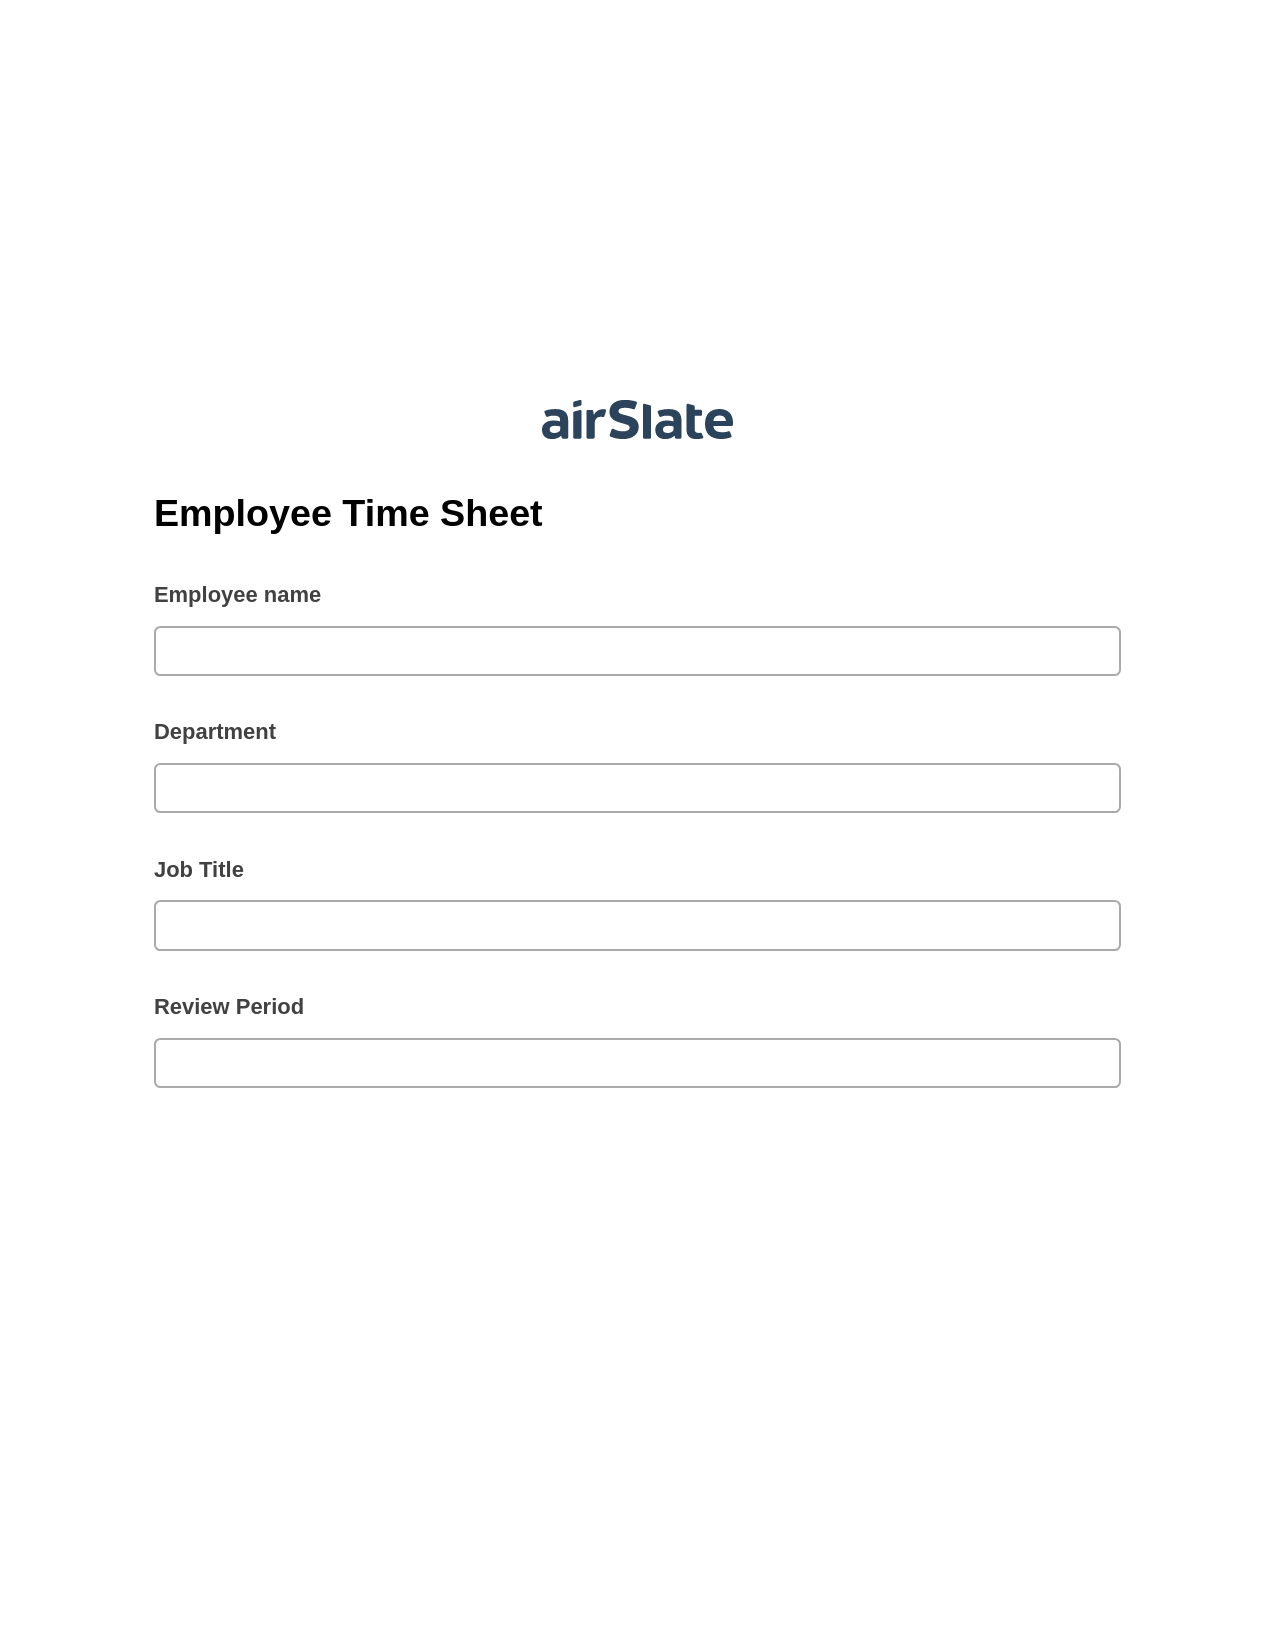 Multirole Employee Time Sheet Pre-fill from another Slate Bot, Create Salesforce Records Bot, Post-finish Document Bot